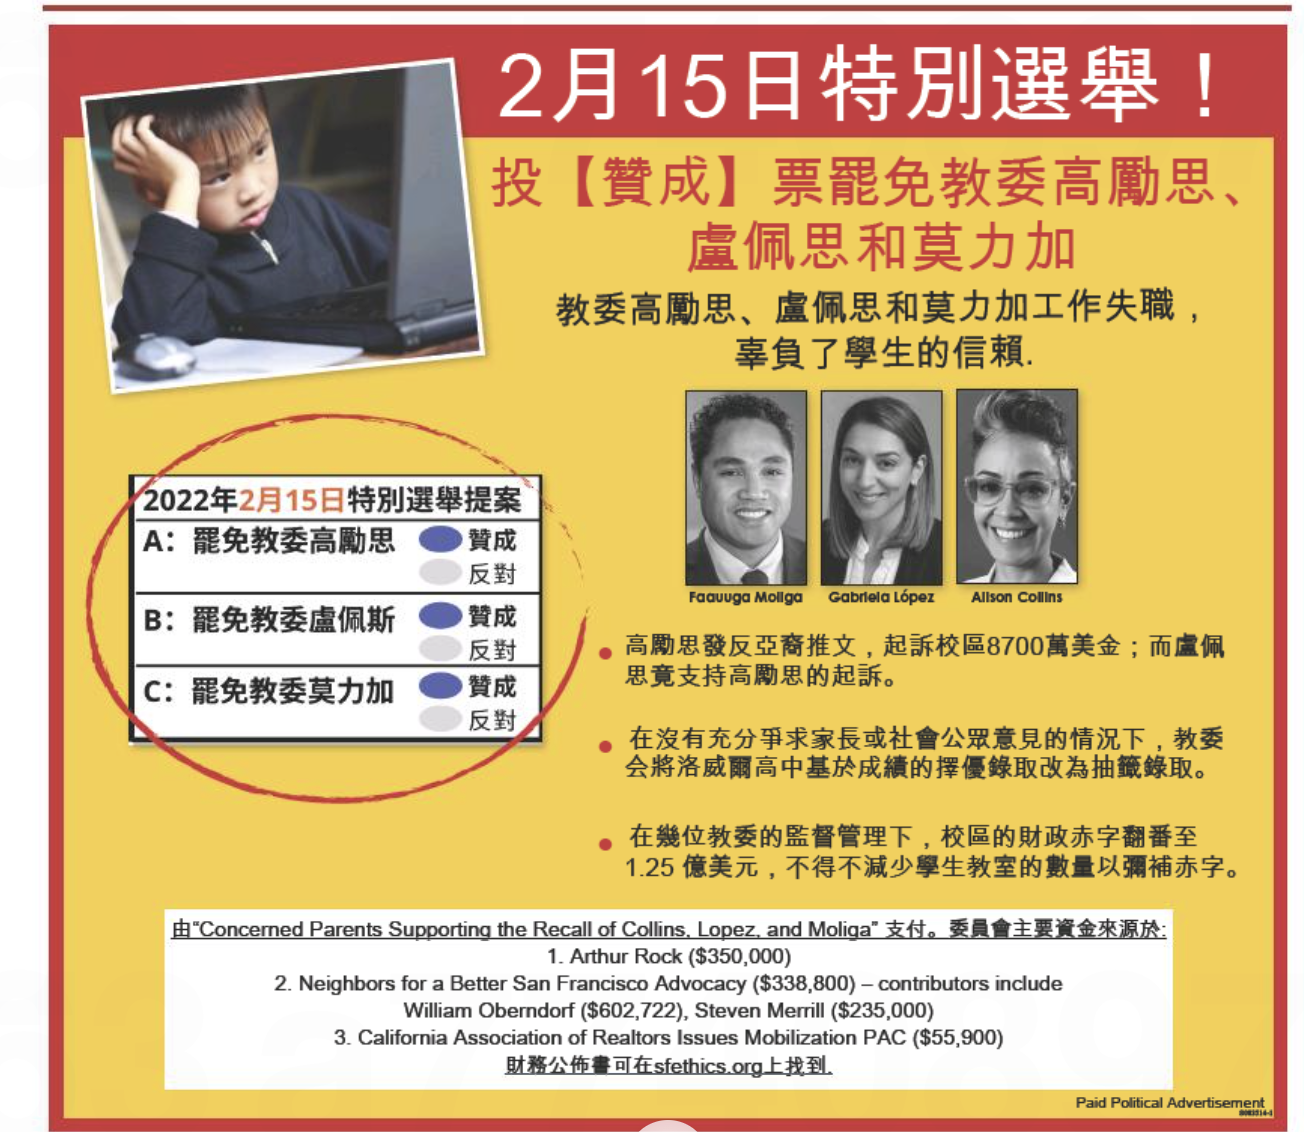 Chinese language ad in support of recalling SFUSD board members